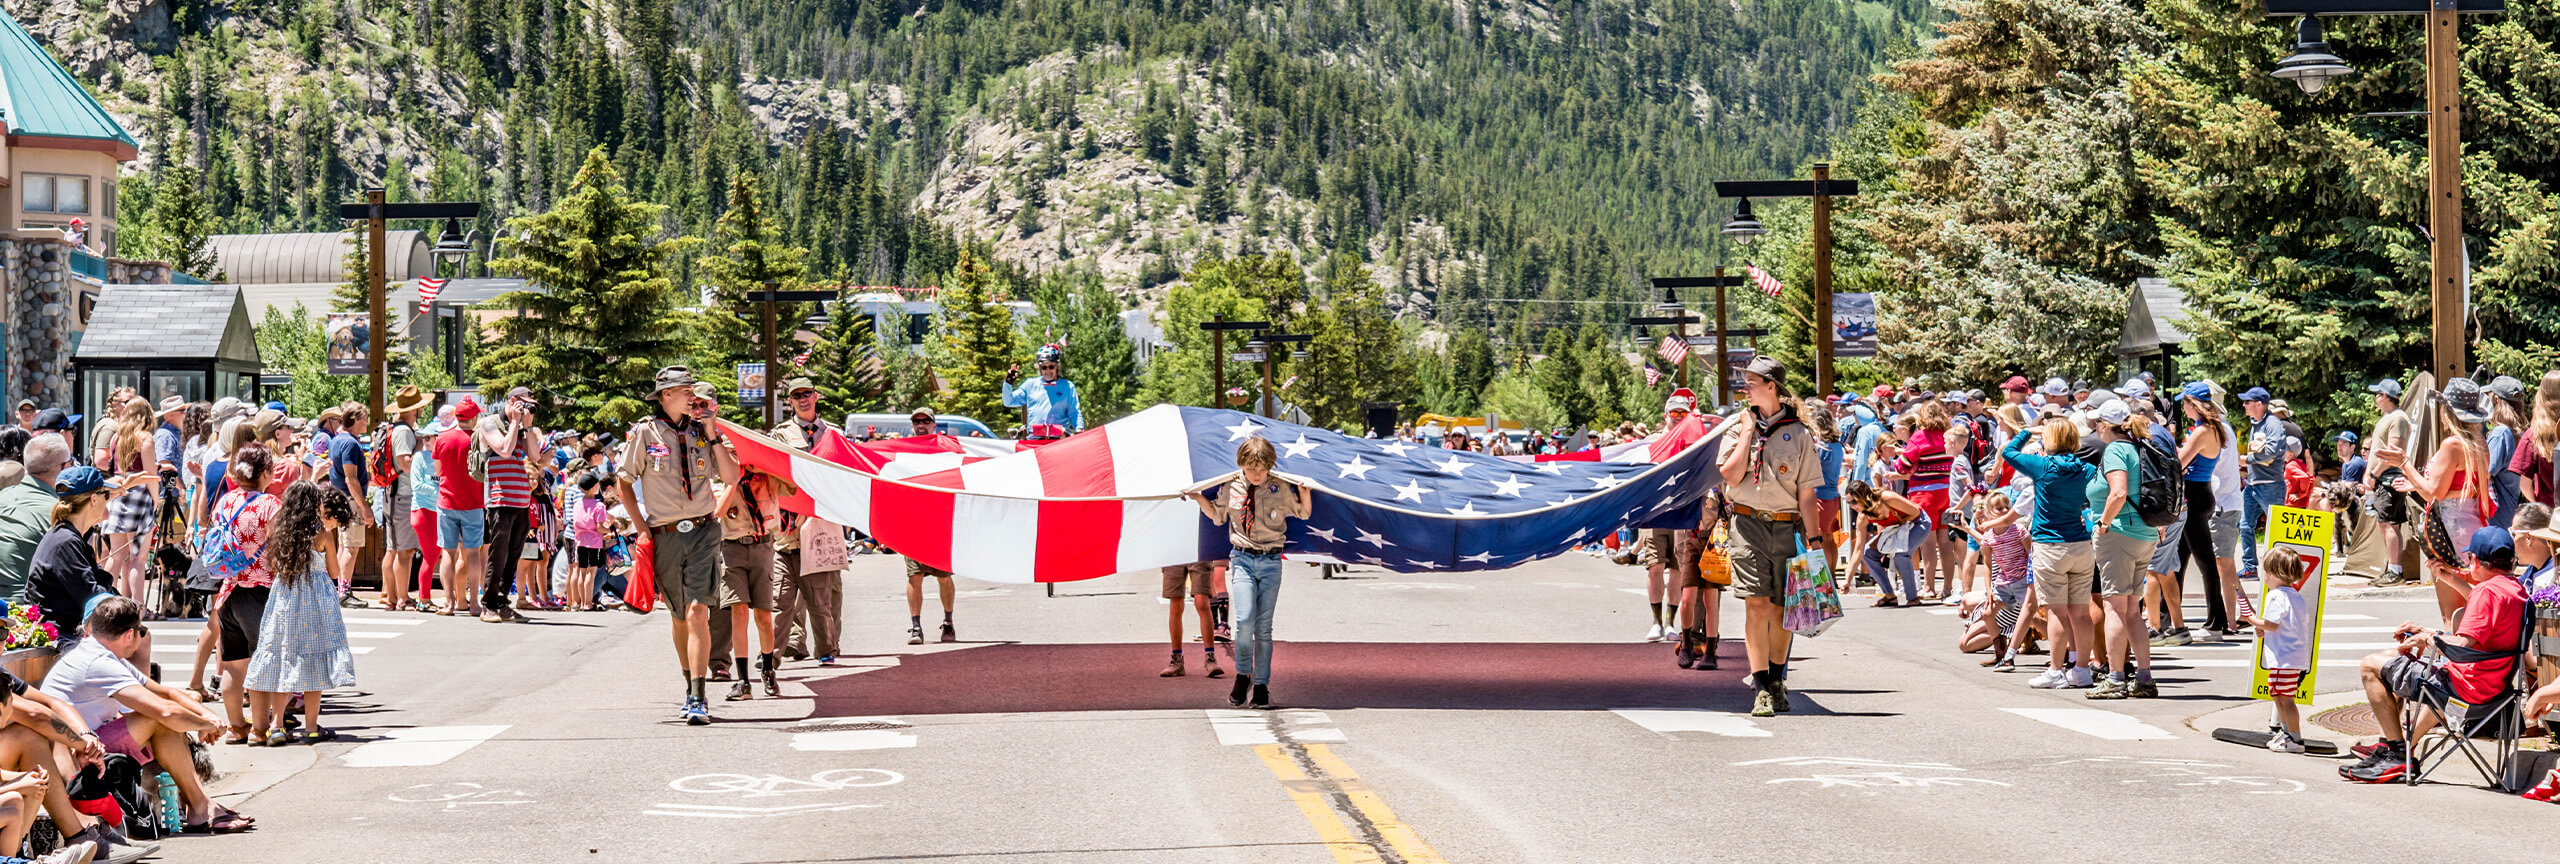 Boy Scouts carry flag during Frisco's Fabulous 4th of July parade